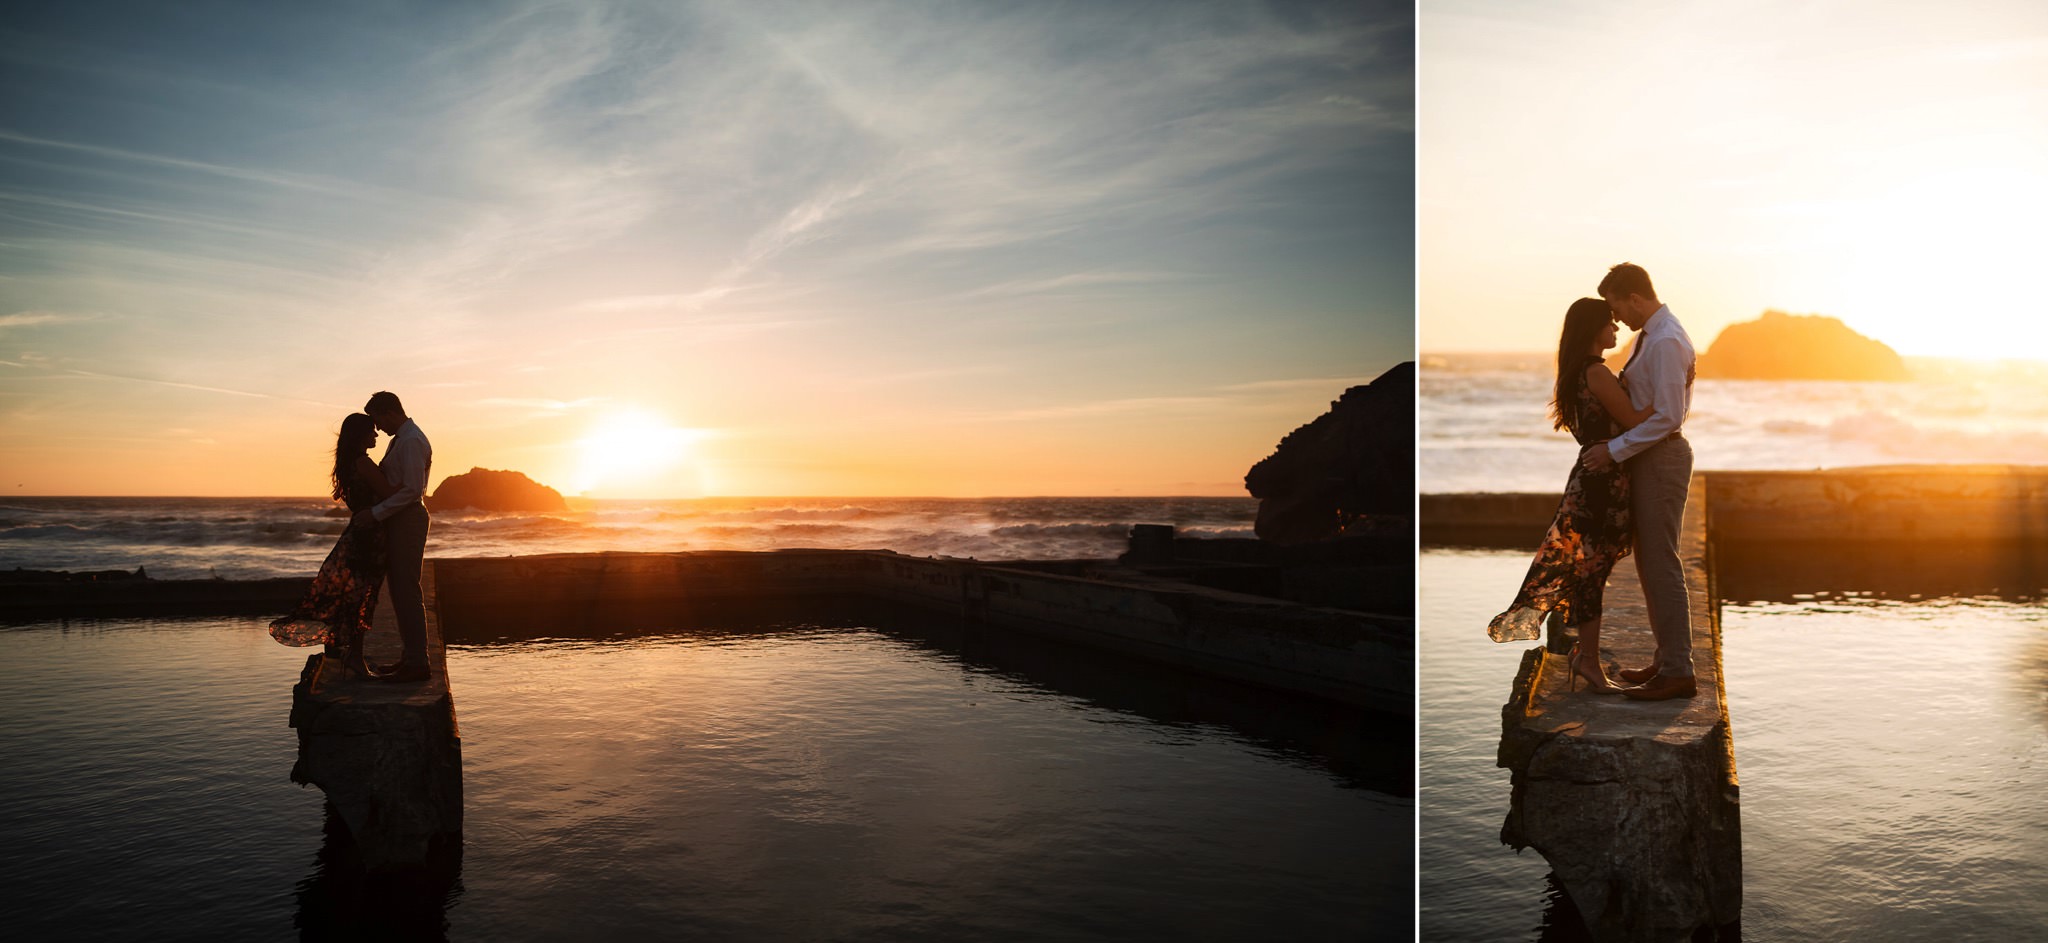  Sutro Baths Engagement Session // Bay Area Wedding Photographer

Photo by Trung Hoang Photography |www.trunghoangphotography.com | San Francisco Bay Area Wedding Photographer 